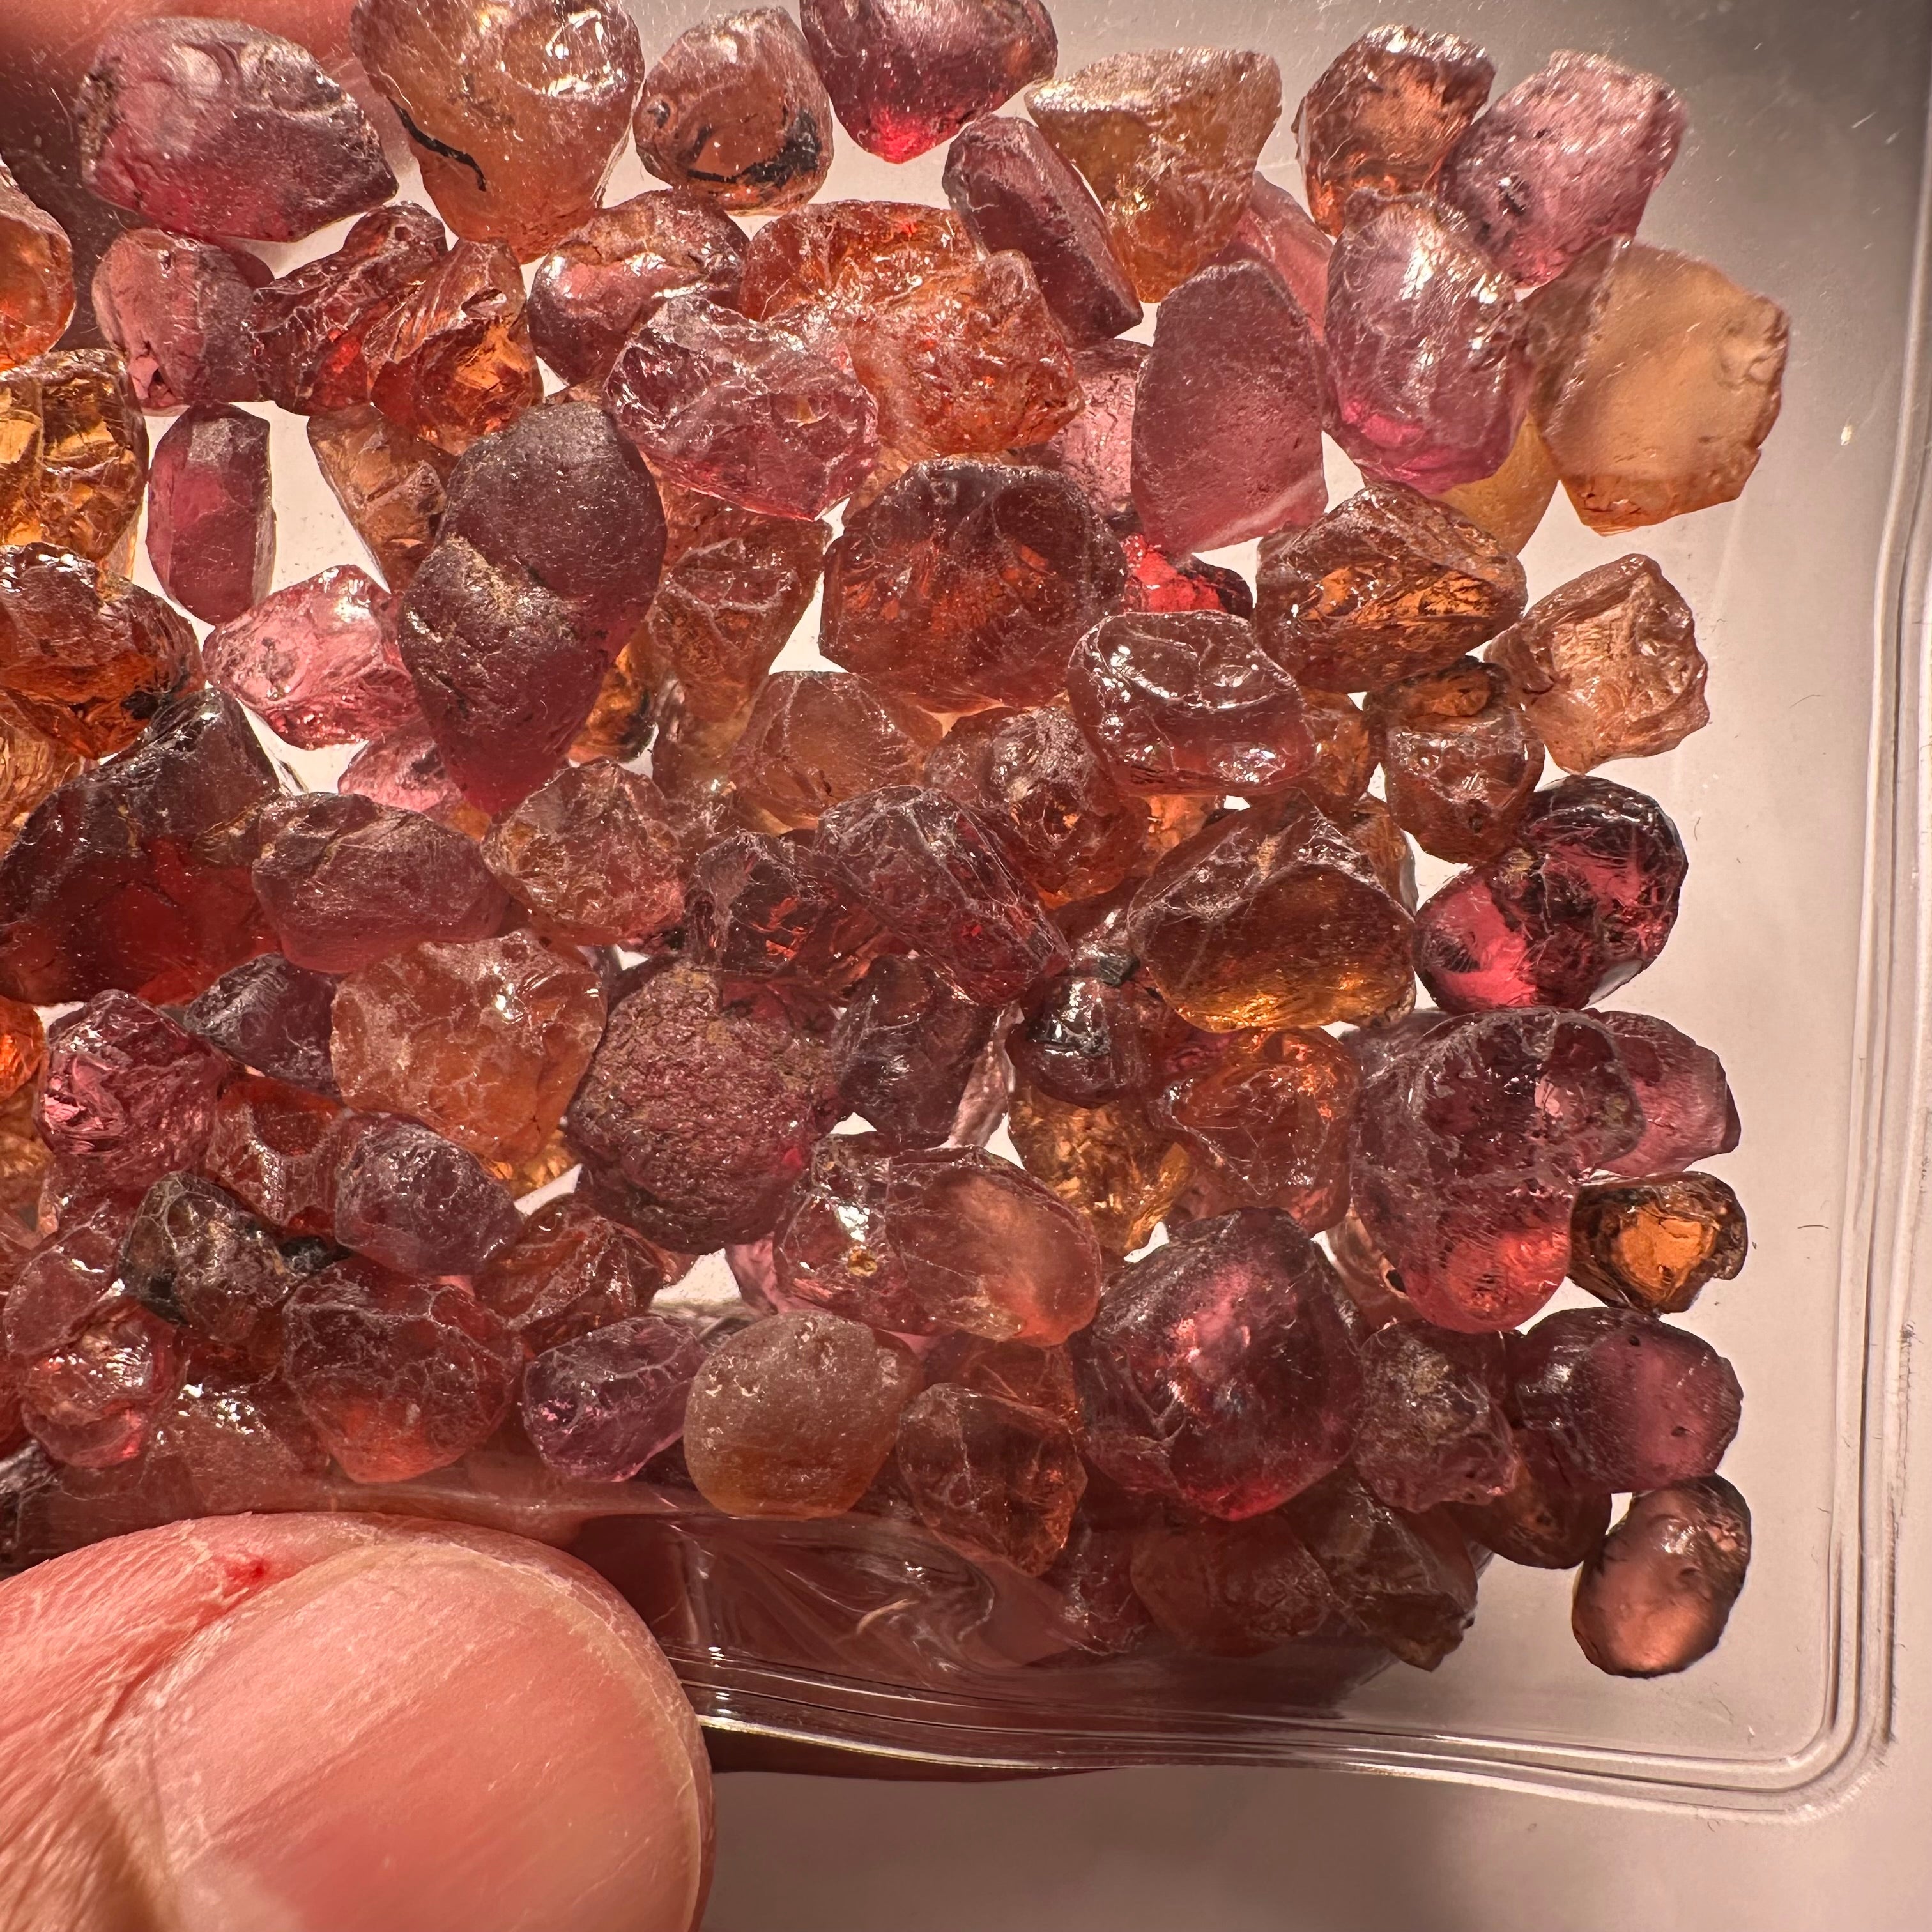 205.17ct Mixed Garnet Lot, Tanzania, Untreated Unheated, slightly included to included